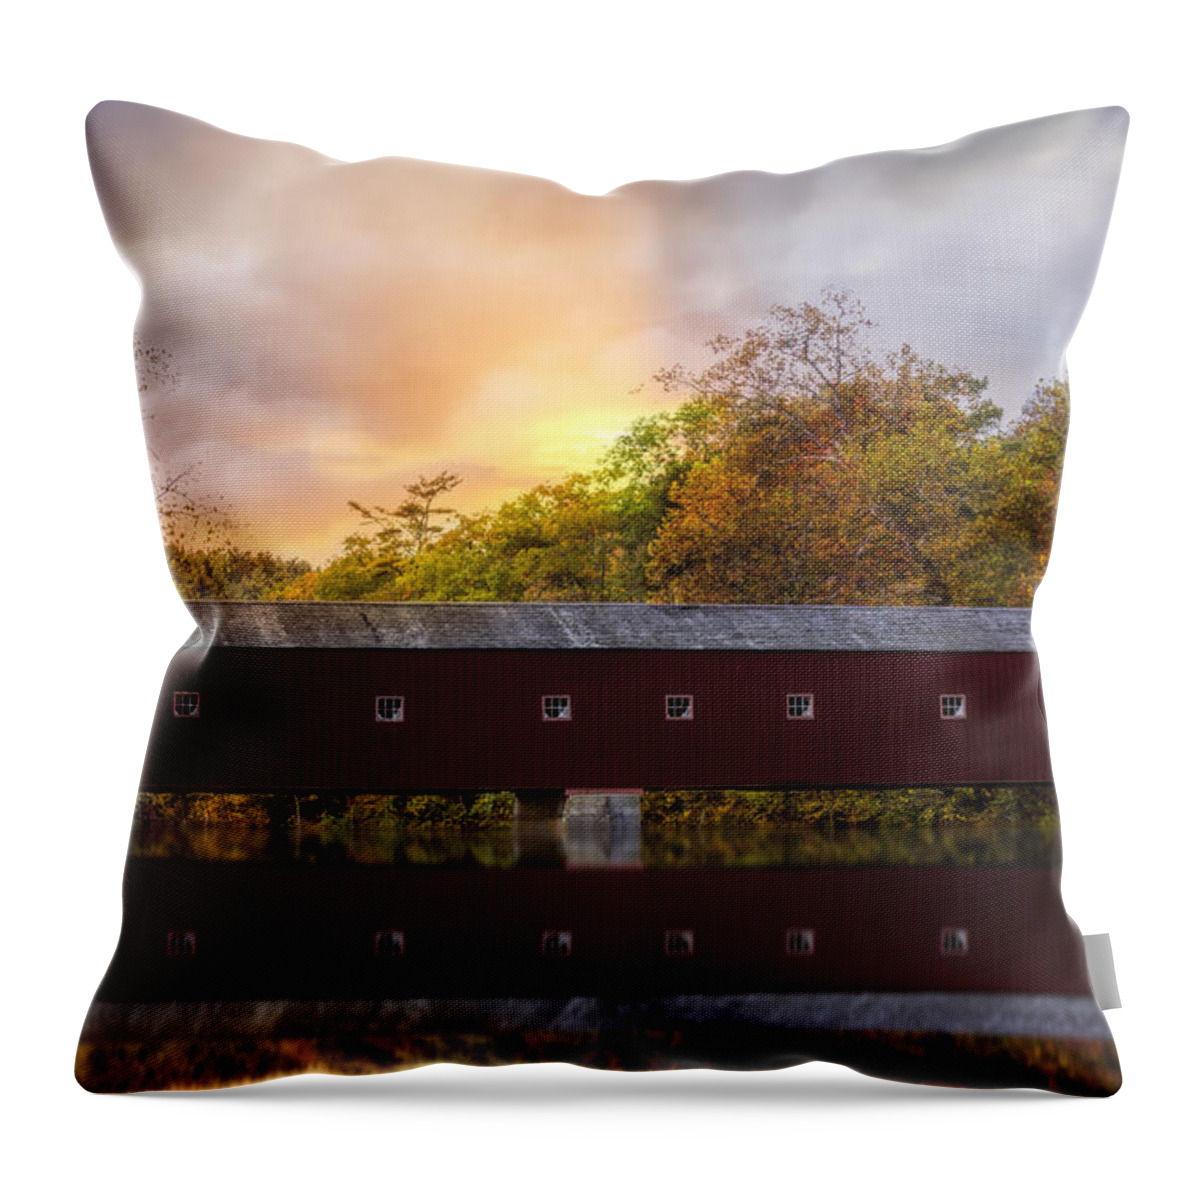 Cornwall Throw Pillow featuring the photograph West Cornwall Covered Bridge by Susan Candelario